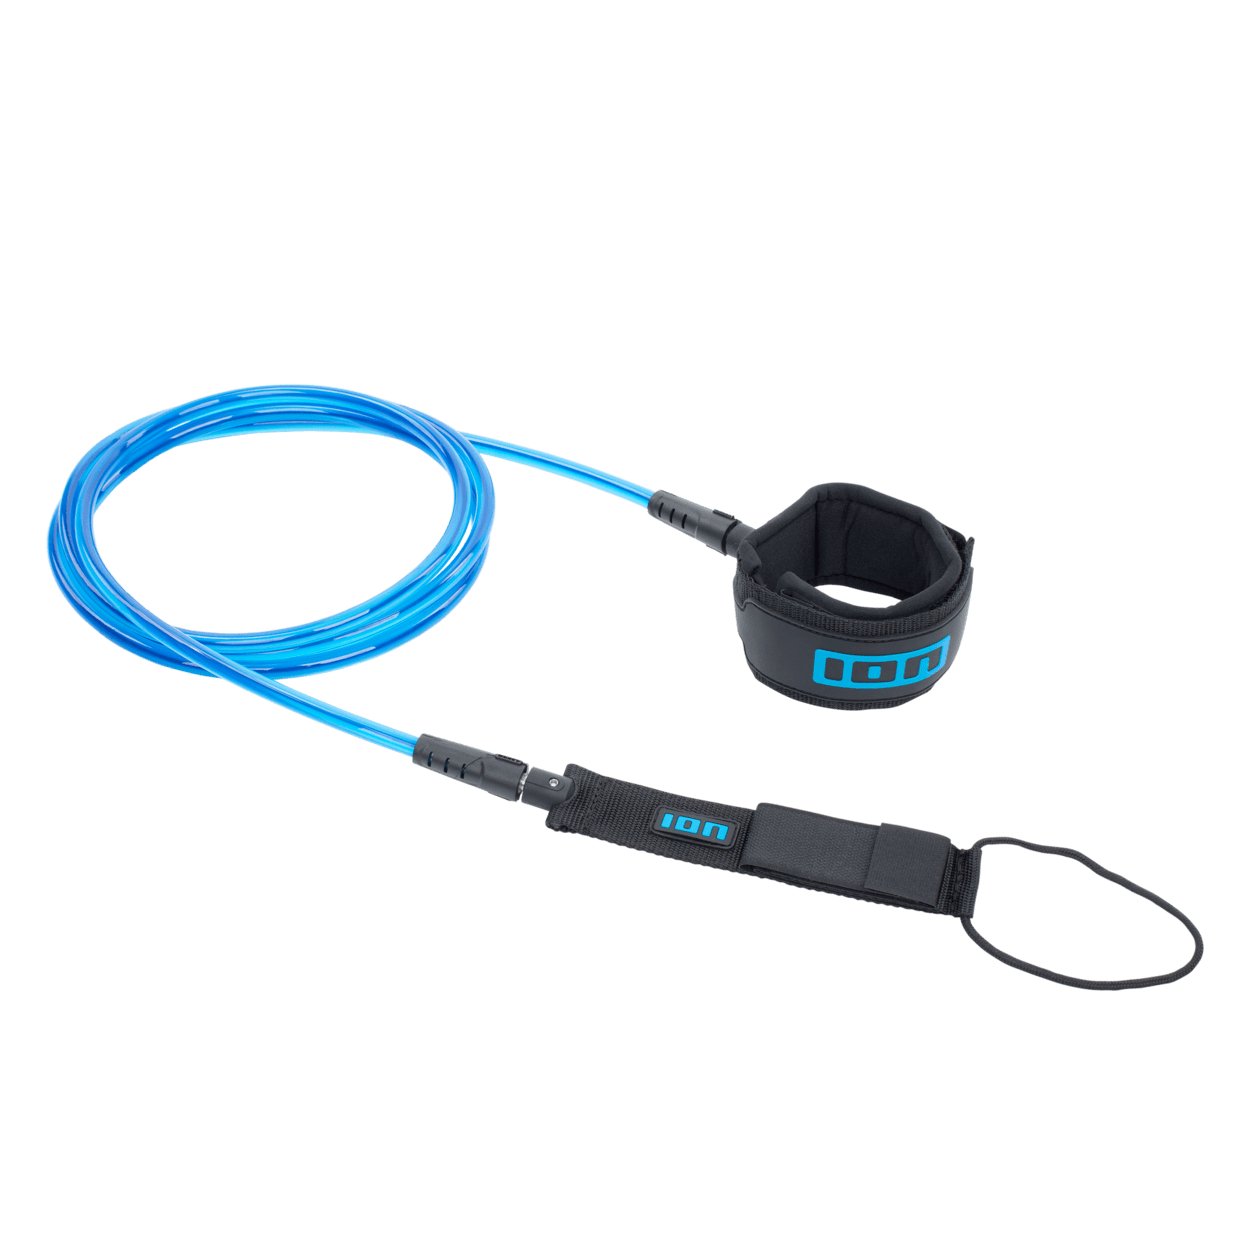 ION SUP Leash Core Ankle 2022 - Worthing Watersports - 9008415961016 - Accessories - ION Water